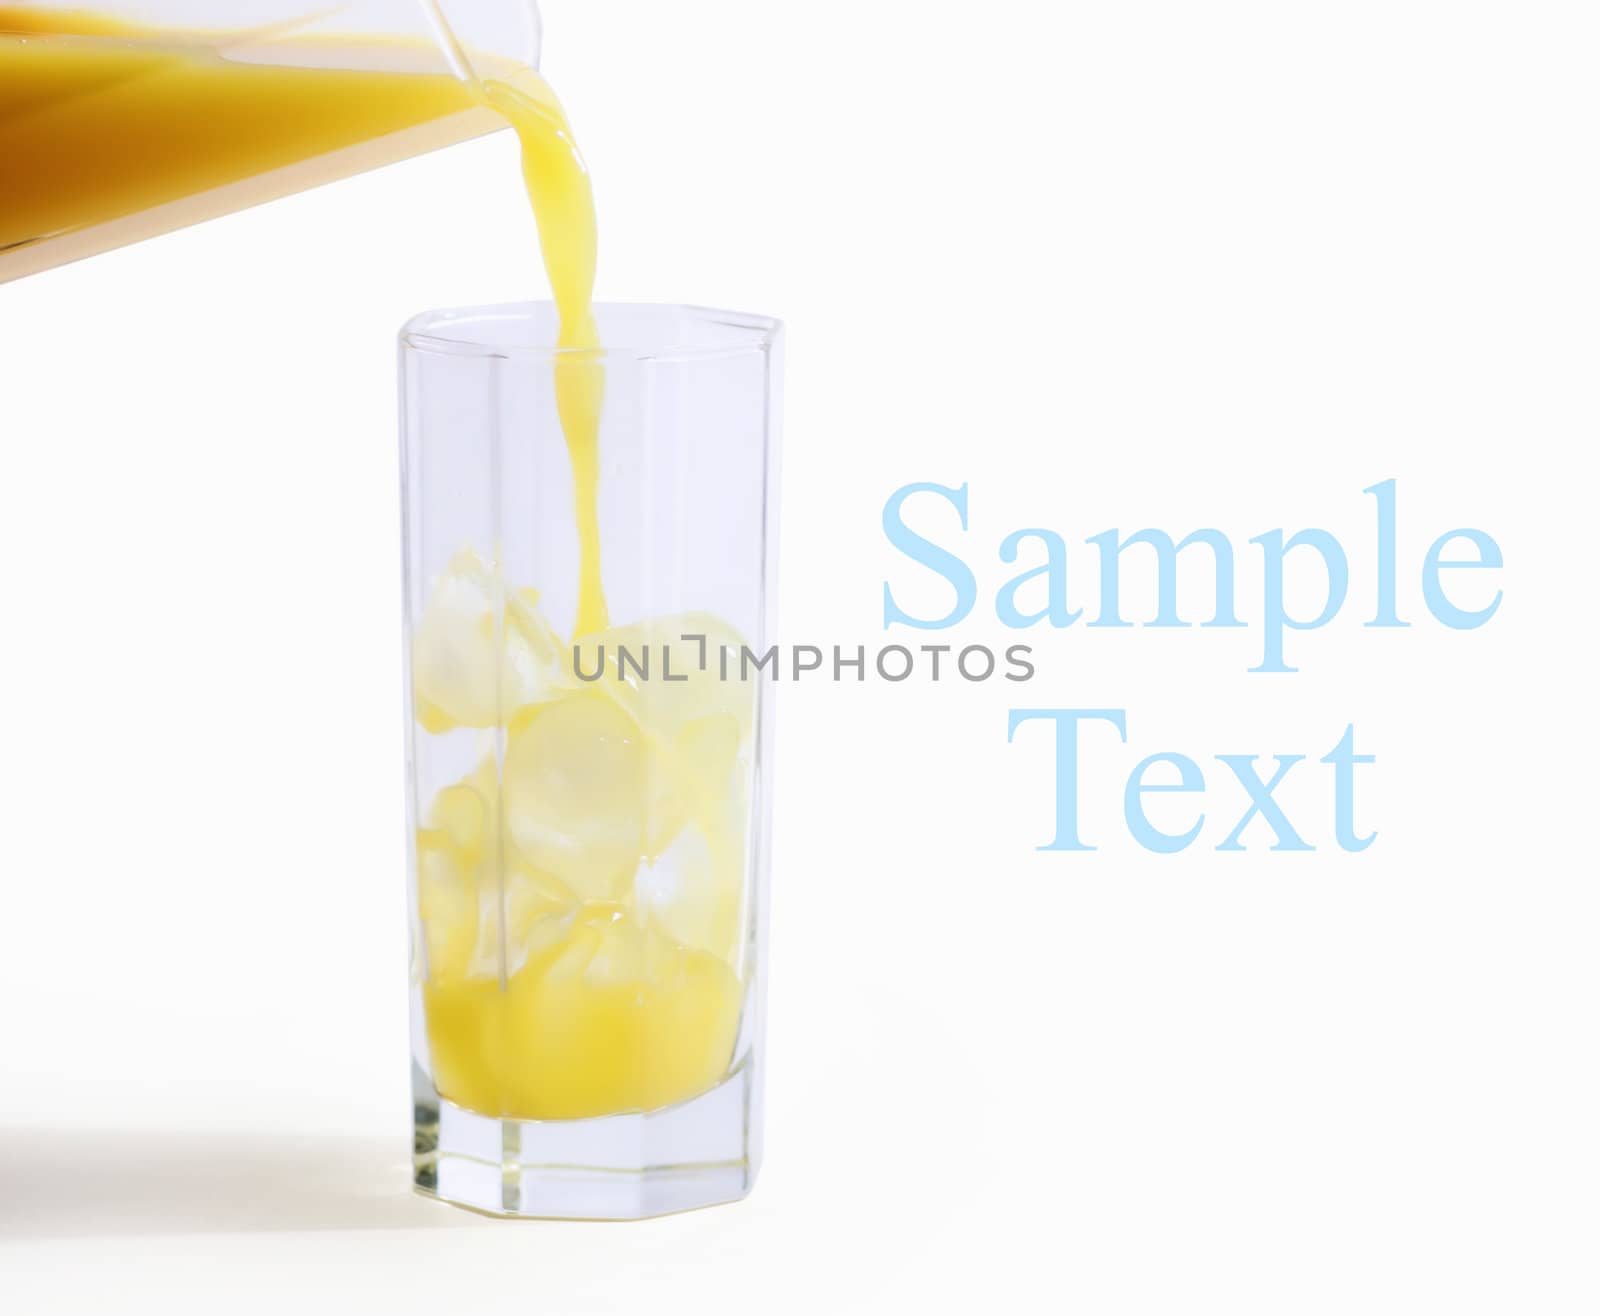 orange juce pouring in a glass on white background  with space for your text  - hand made clipping path included